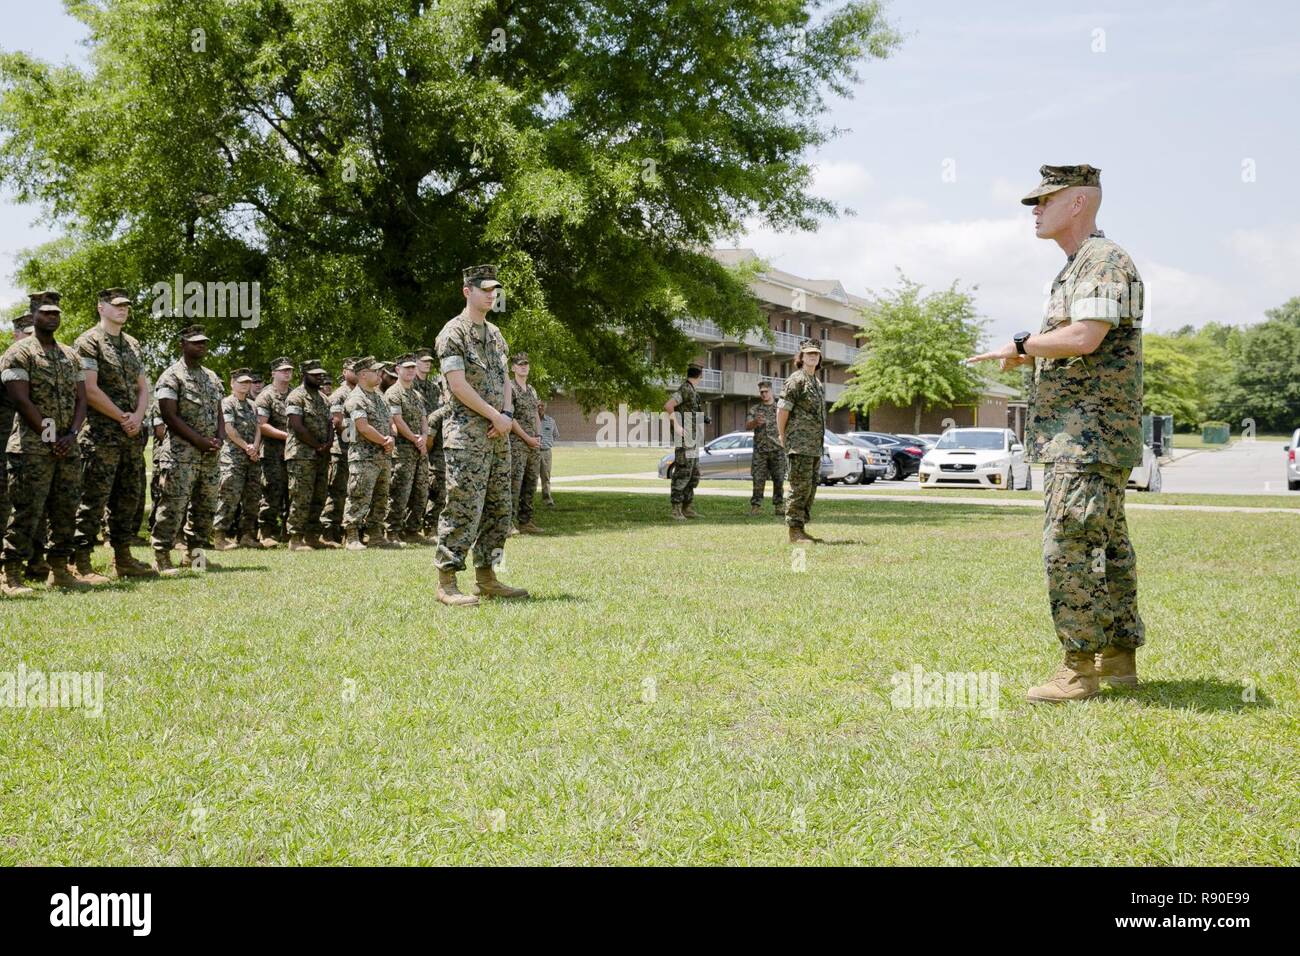 U.S. Marine Corps Brig. Gen. Maxwell, commanding general, II Marine Expeditionary Force (II MEF), addresses Marines and Sailors of 2nd Medical Battalion, II MEF, before receiving the “Lt. Gen. Chesty Puller” Outstanding Leadership Award on Camp Lejeune, N.C., May 10, 2017. The battalion earned this award for exceptional professional ability, superior performance and dedication to supporting the mission of the II MEF. Stock Photo